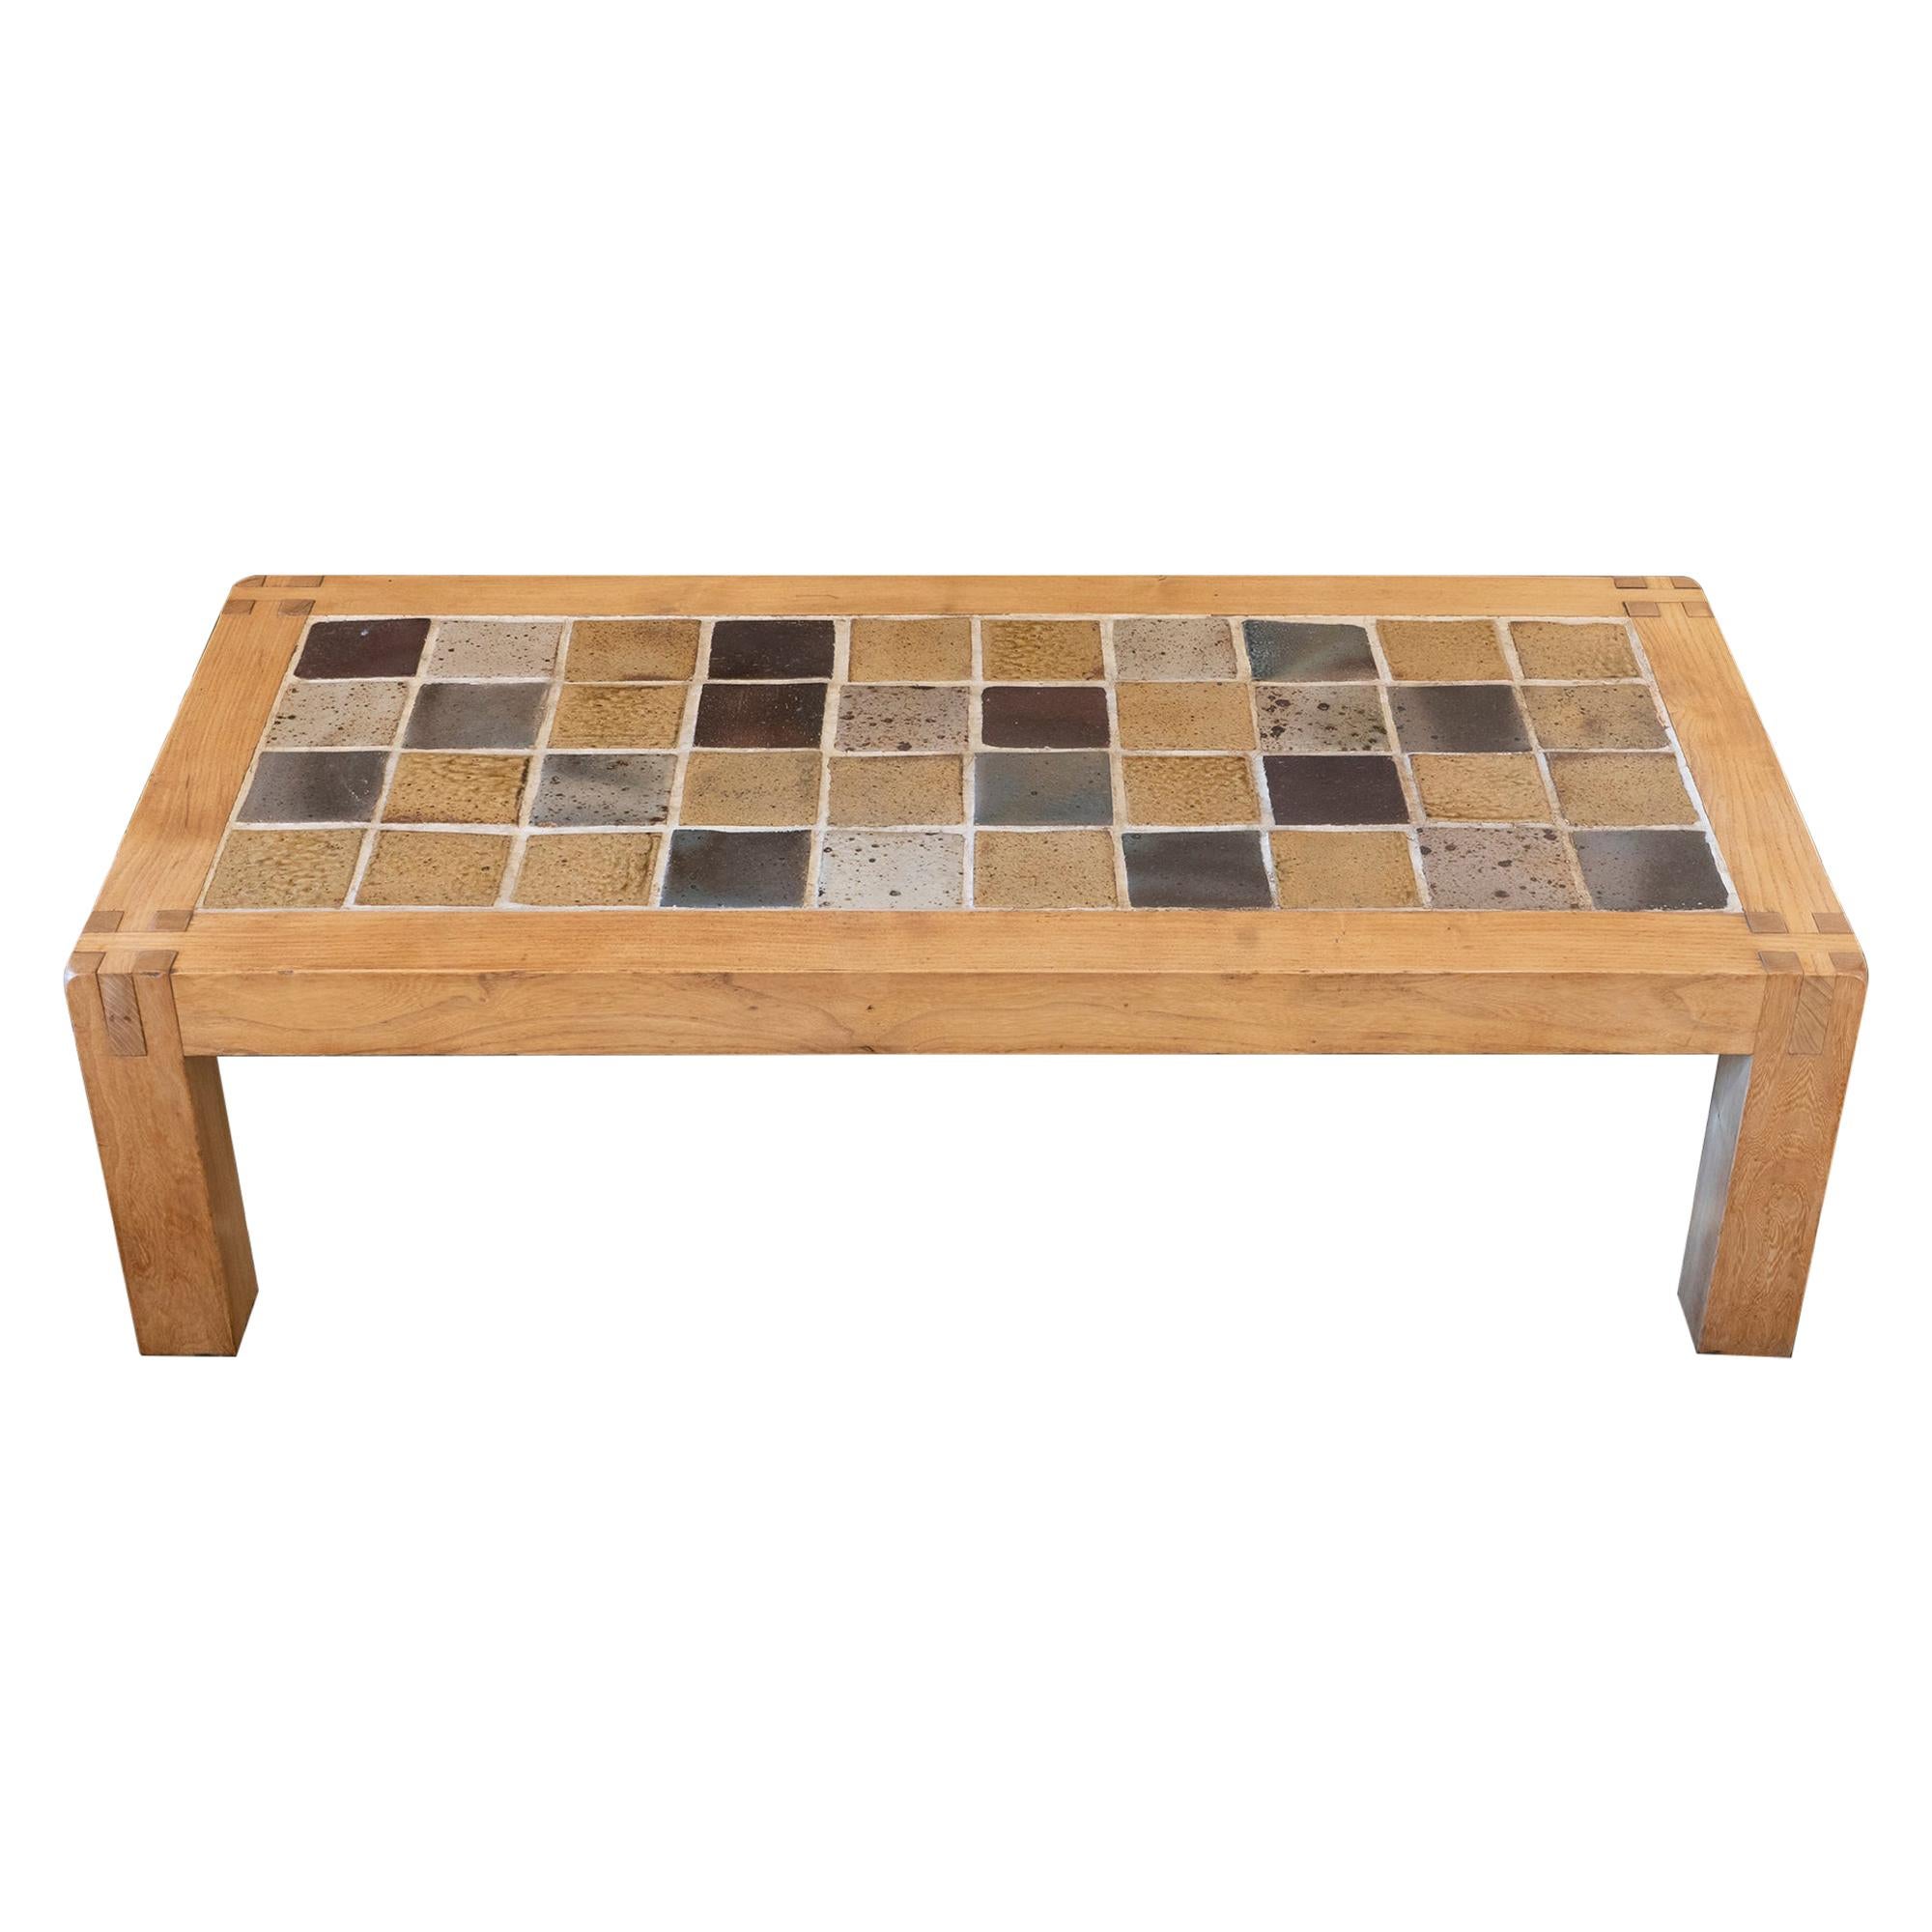 French Oak Wood and Multicolor Ceramic Tiles Coffee Table, 1960's Circa